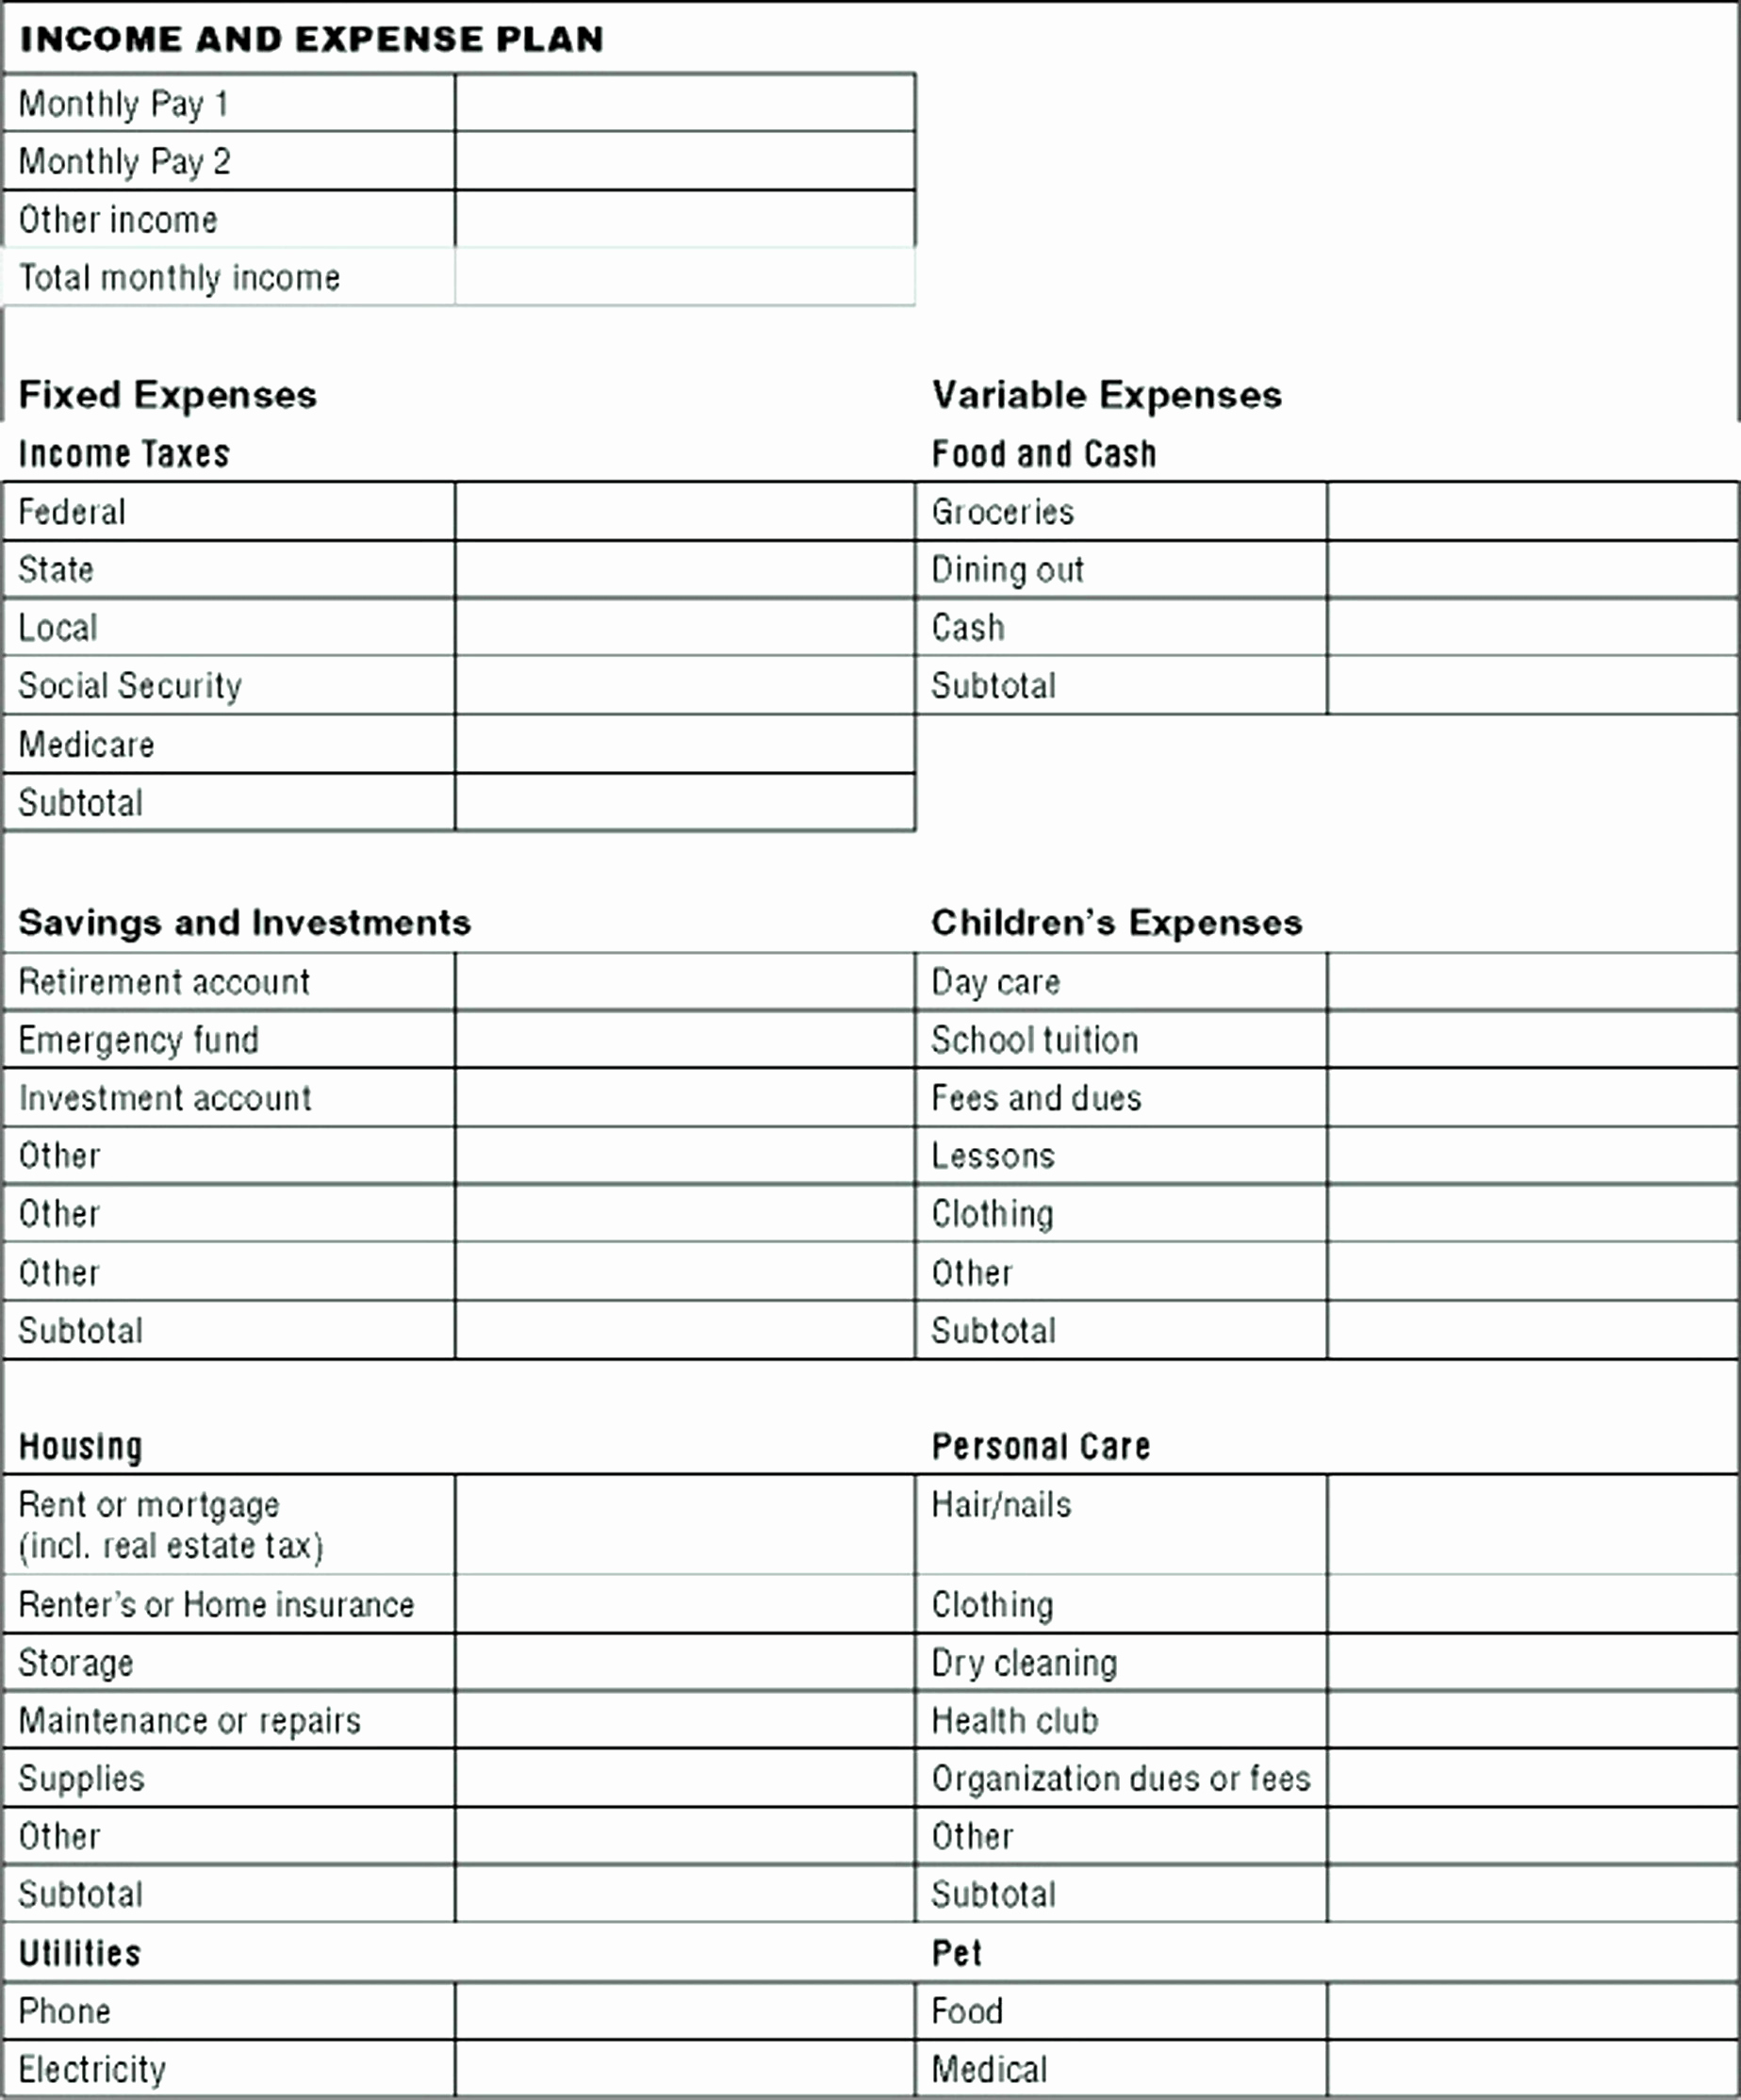 House Cleaning Pricing Spreadsheet Throughout House Cleaning Pricing Spreadsheet Lovely Monthly Expenses Worksheet